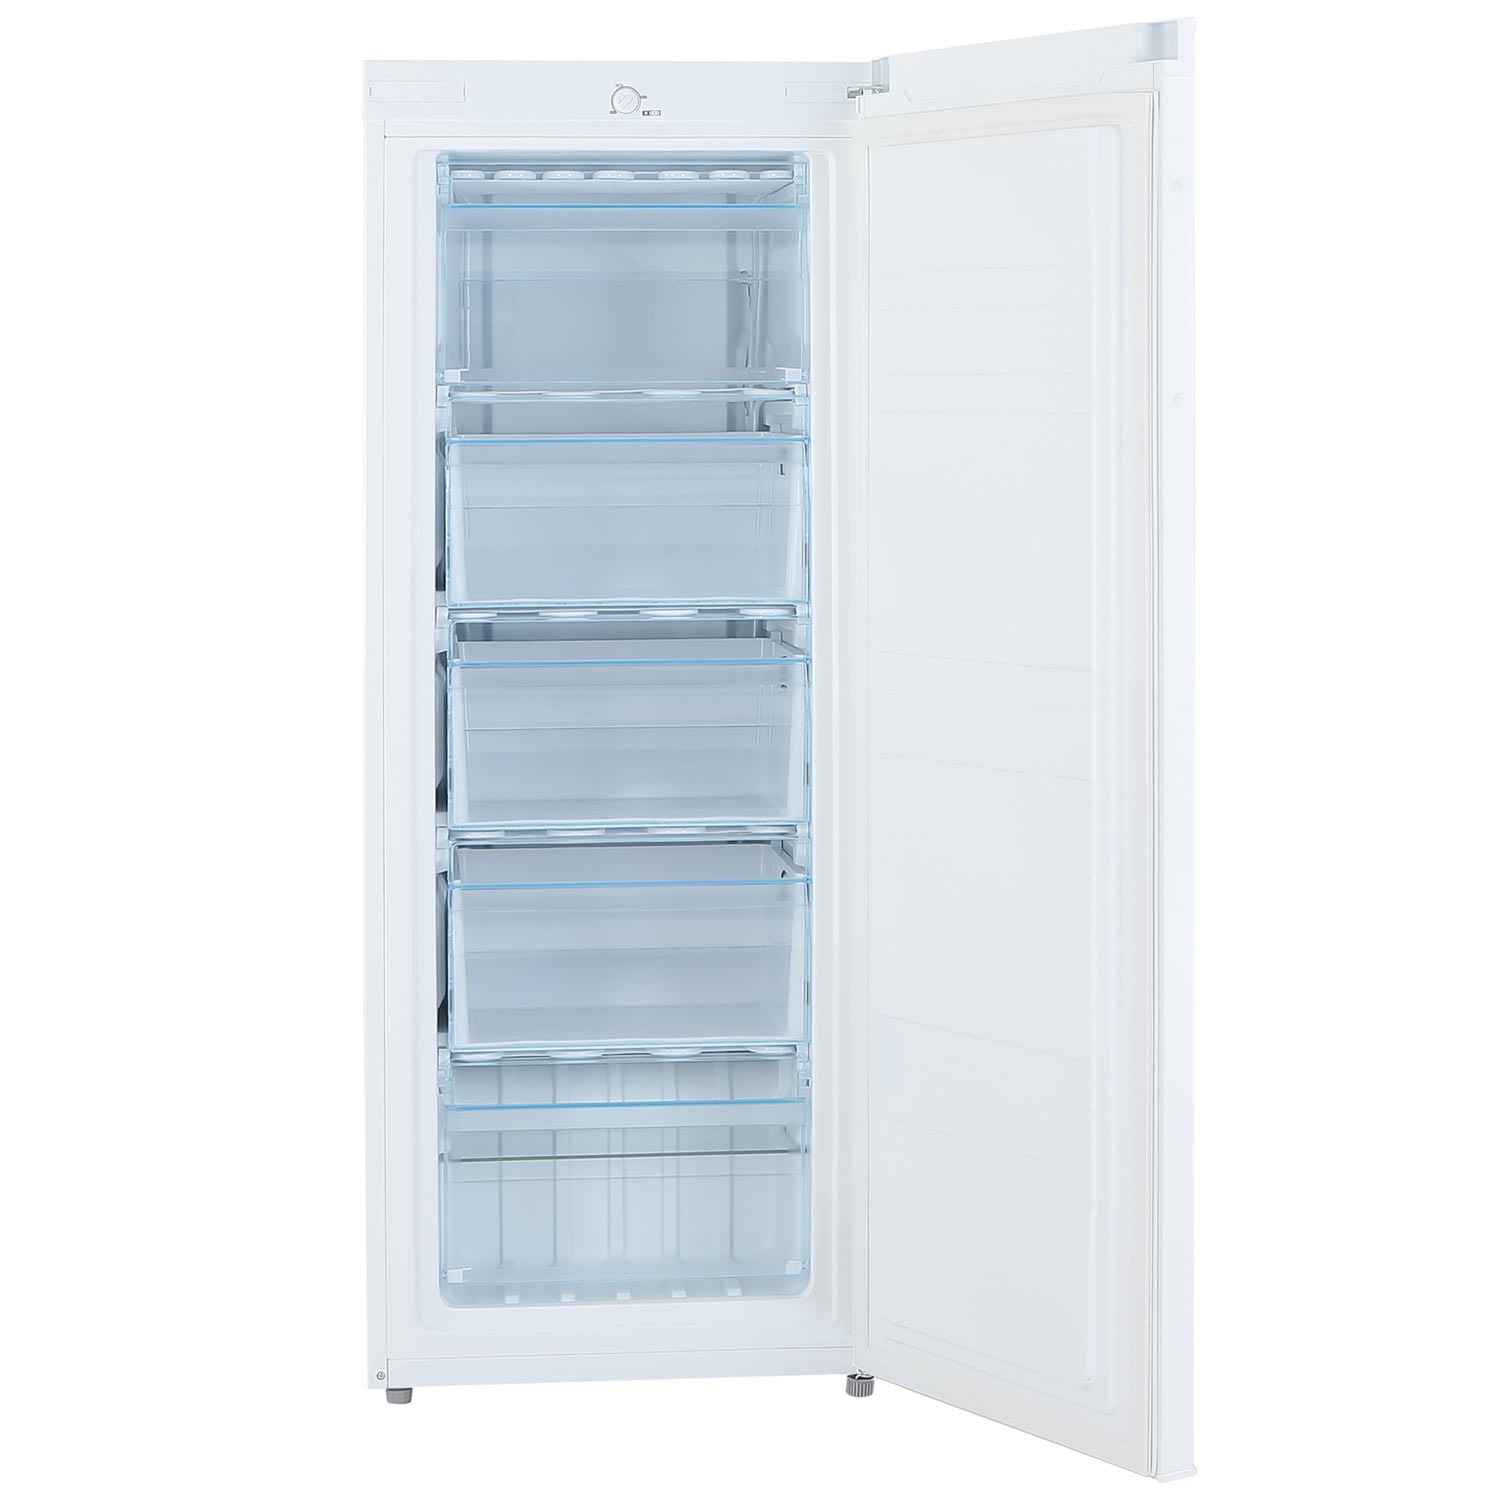 Lec 55cm Tall Freezer - White - A+ Rated - 0